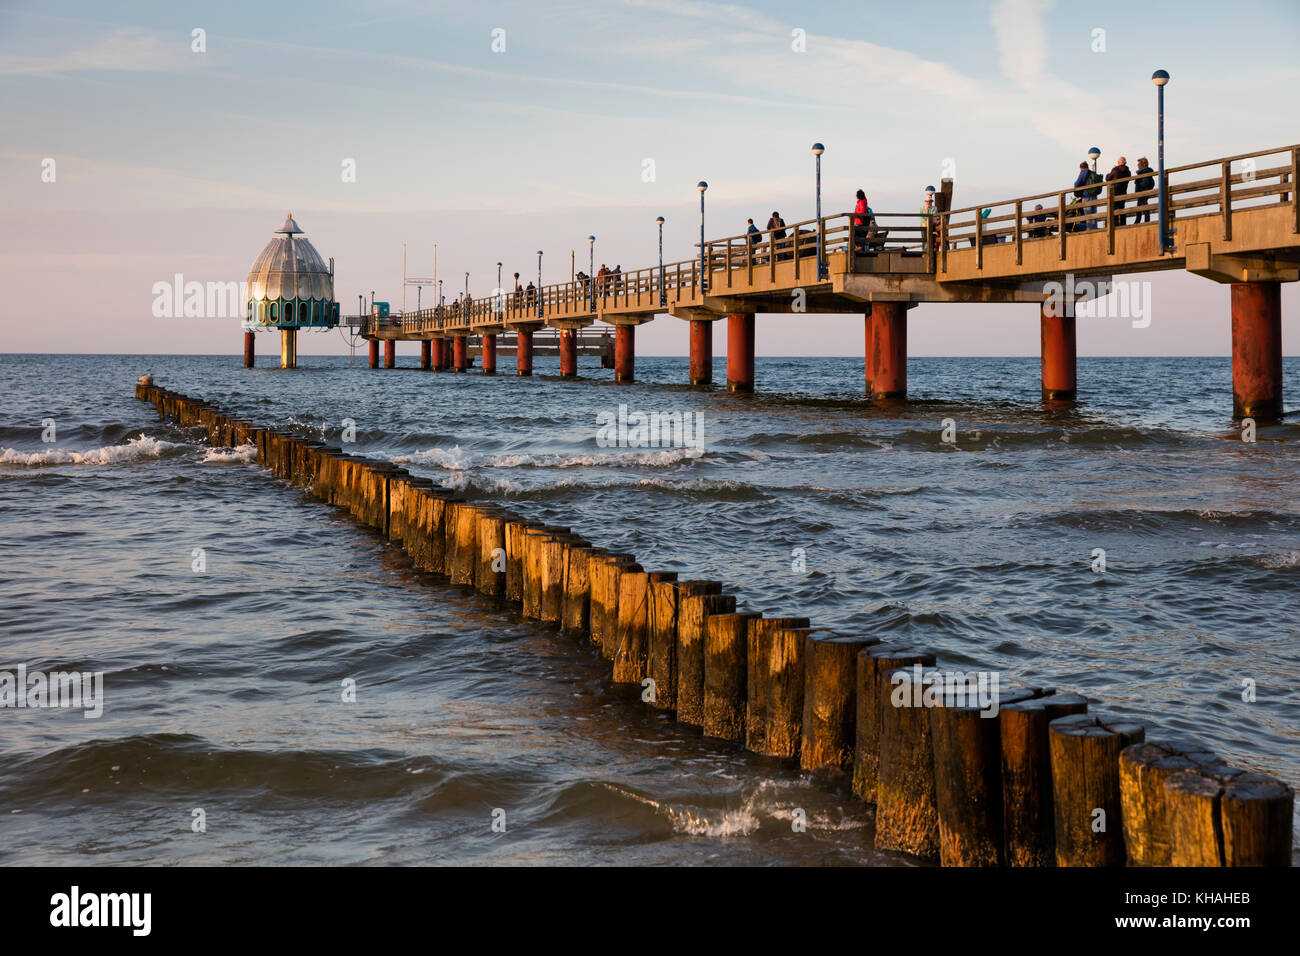 - stock images hi-res photography seebrucke and Zingst Alamy